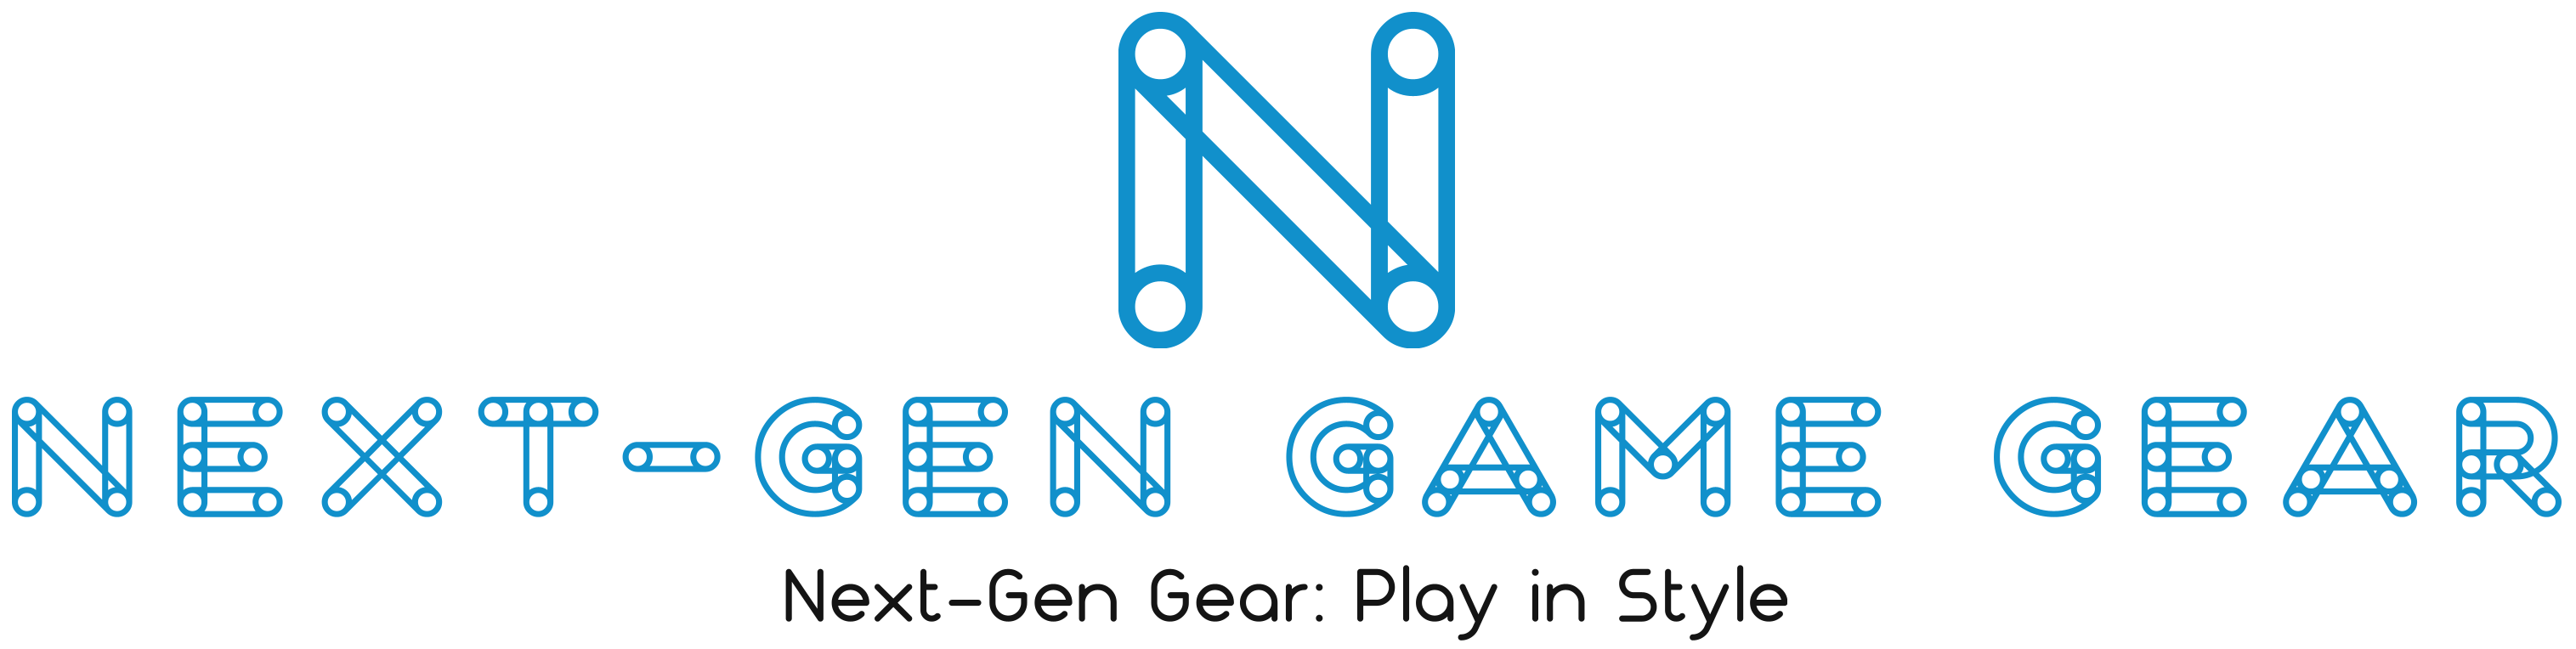 10% Off With Next-Gen Game Gear Promo Code